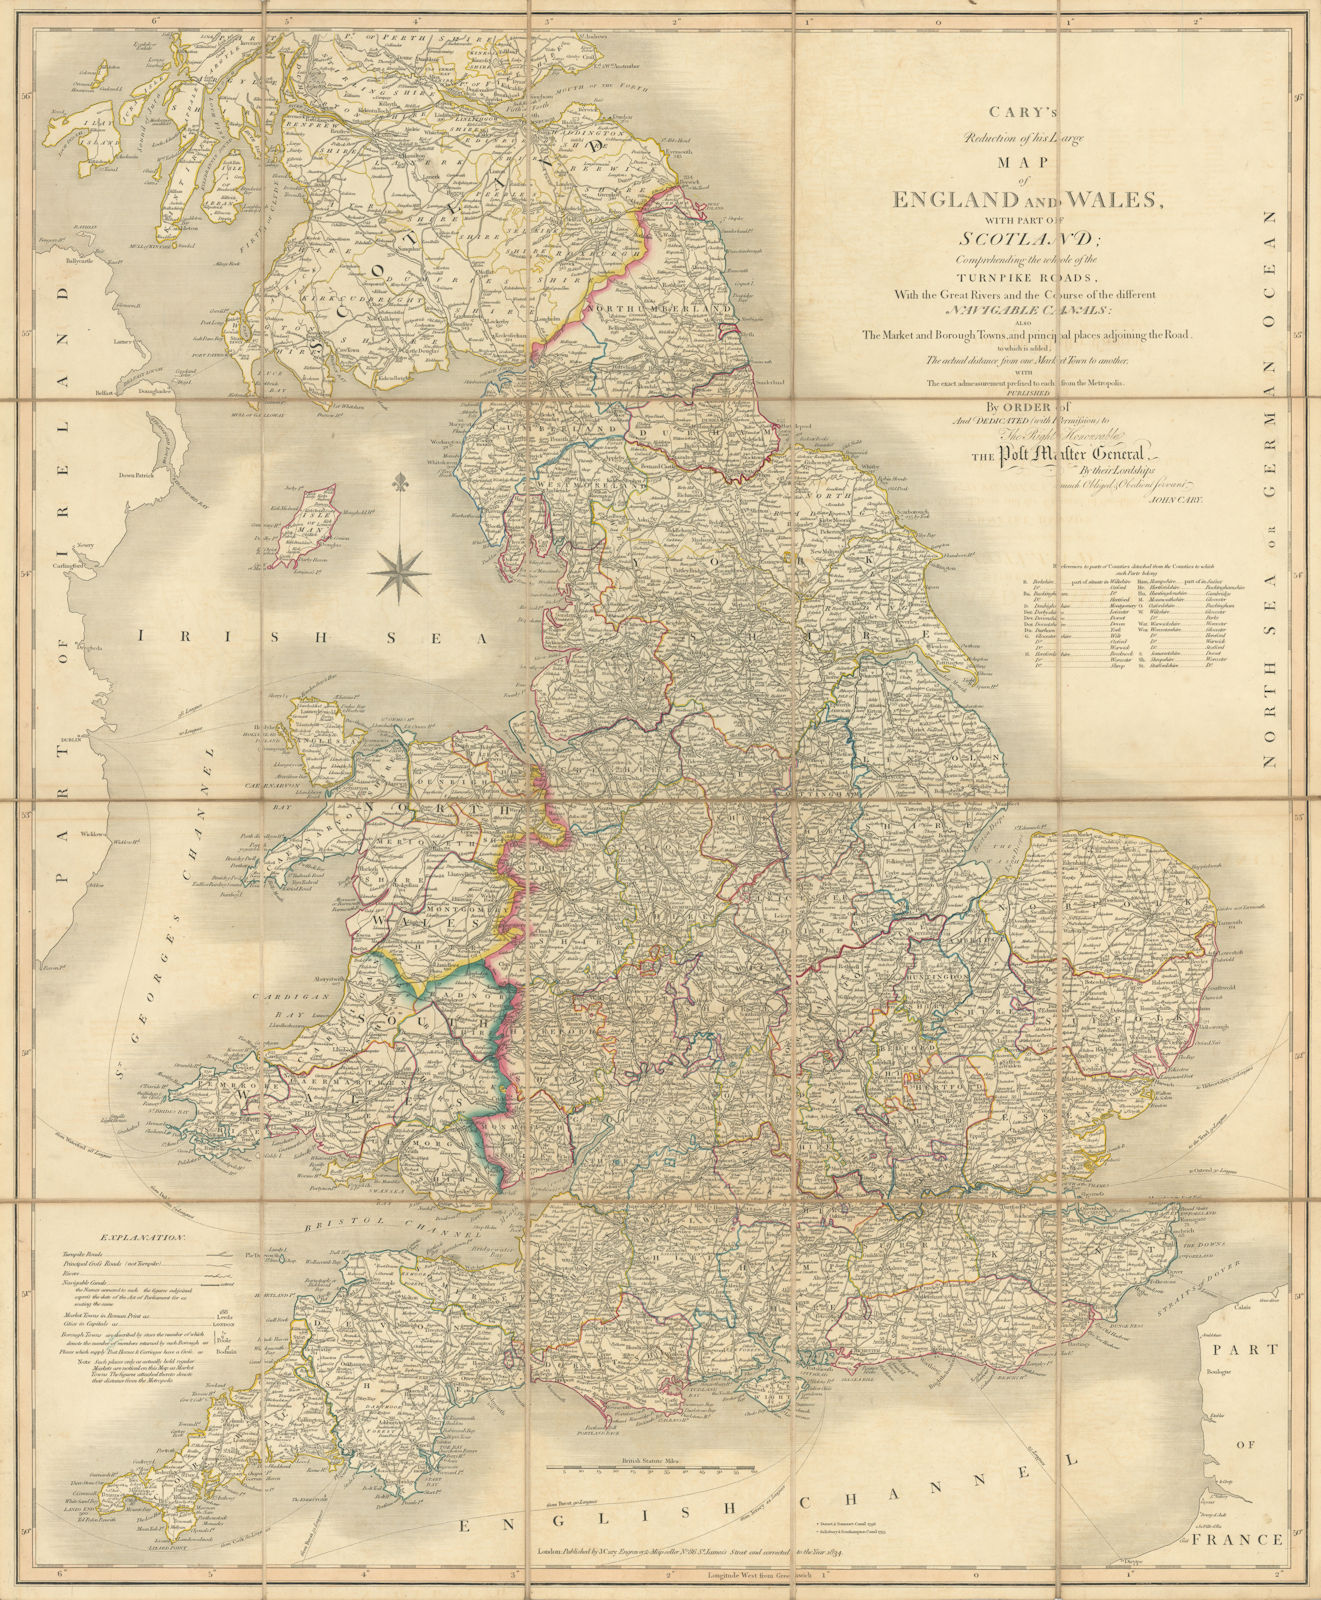 Associate Product 'Cary's reduction of his large map of England & Wales'. Turnpikes canals &c 1834